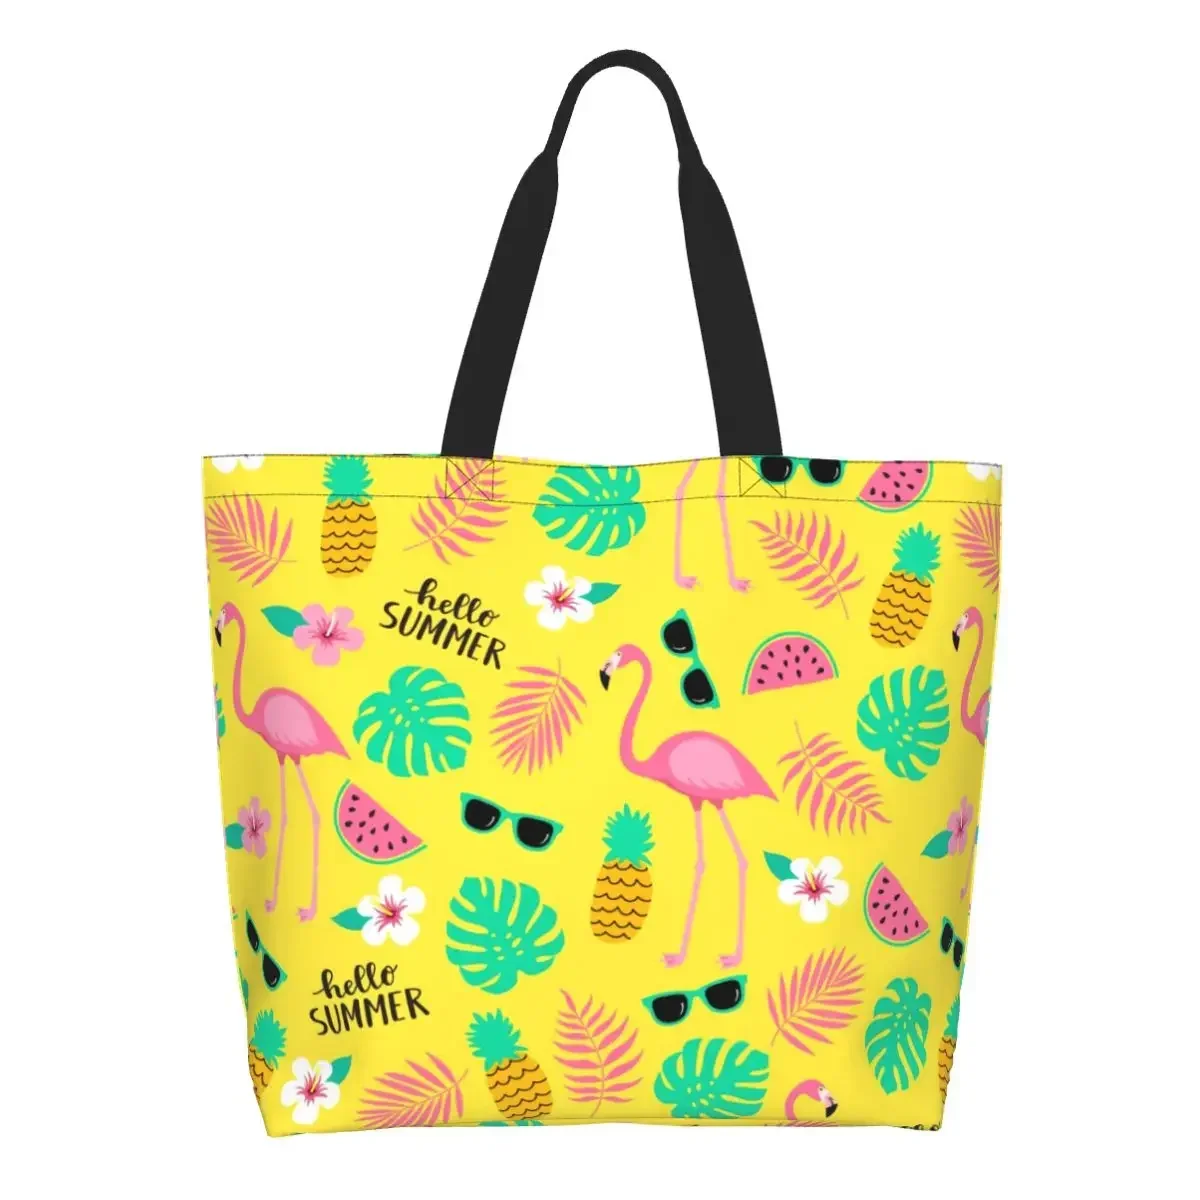 

Cute Flamingos And Leaves Shopping Tote Bags Recycling Tropical Pineapple Pattern Canvas Groceries Shoulder Shopper Bag